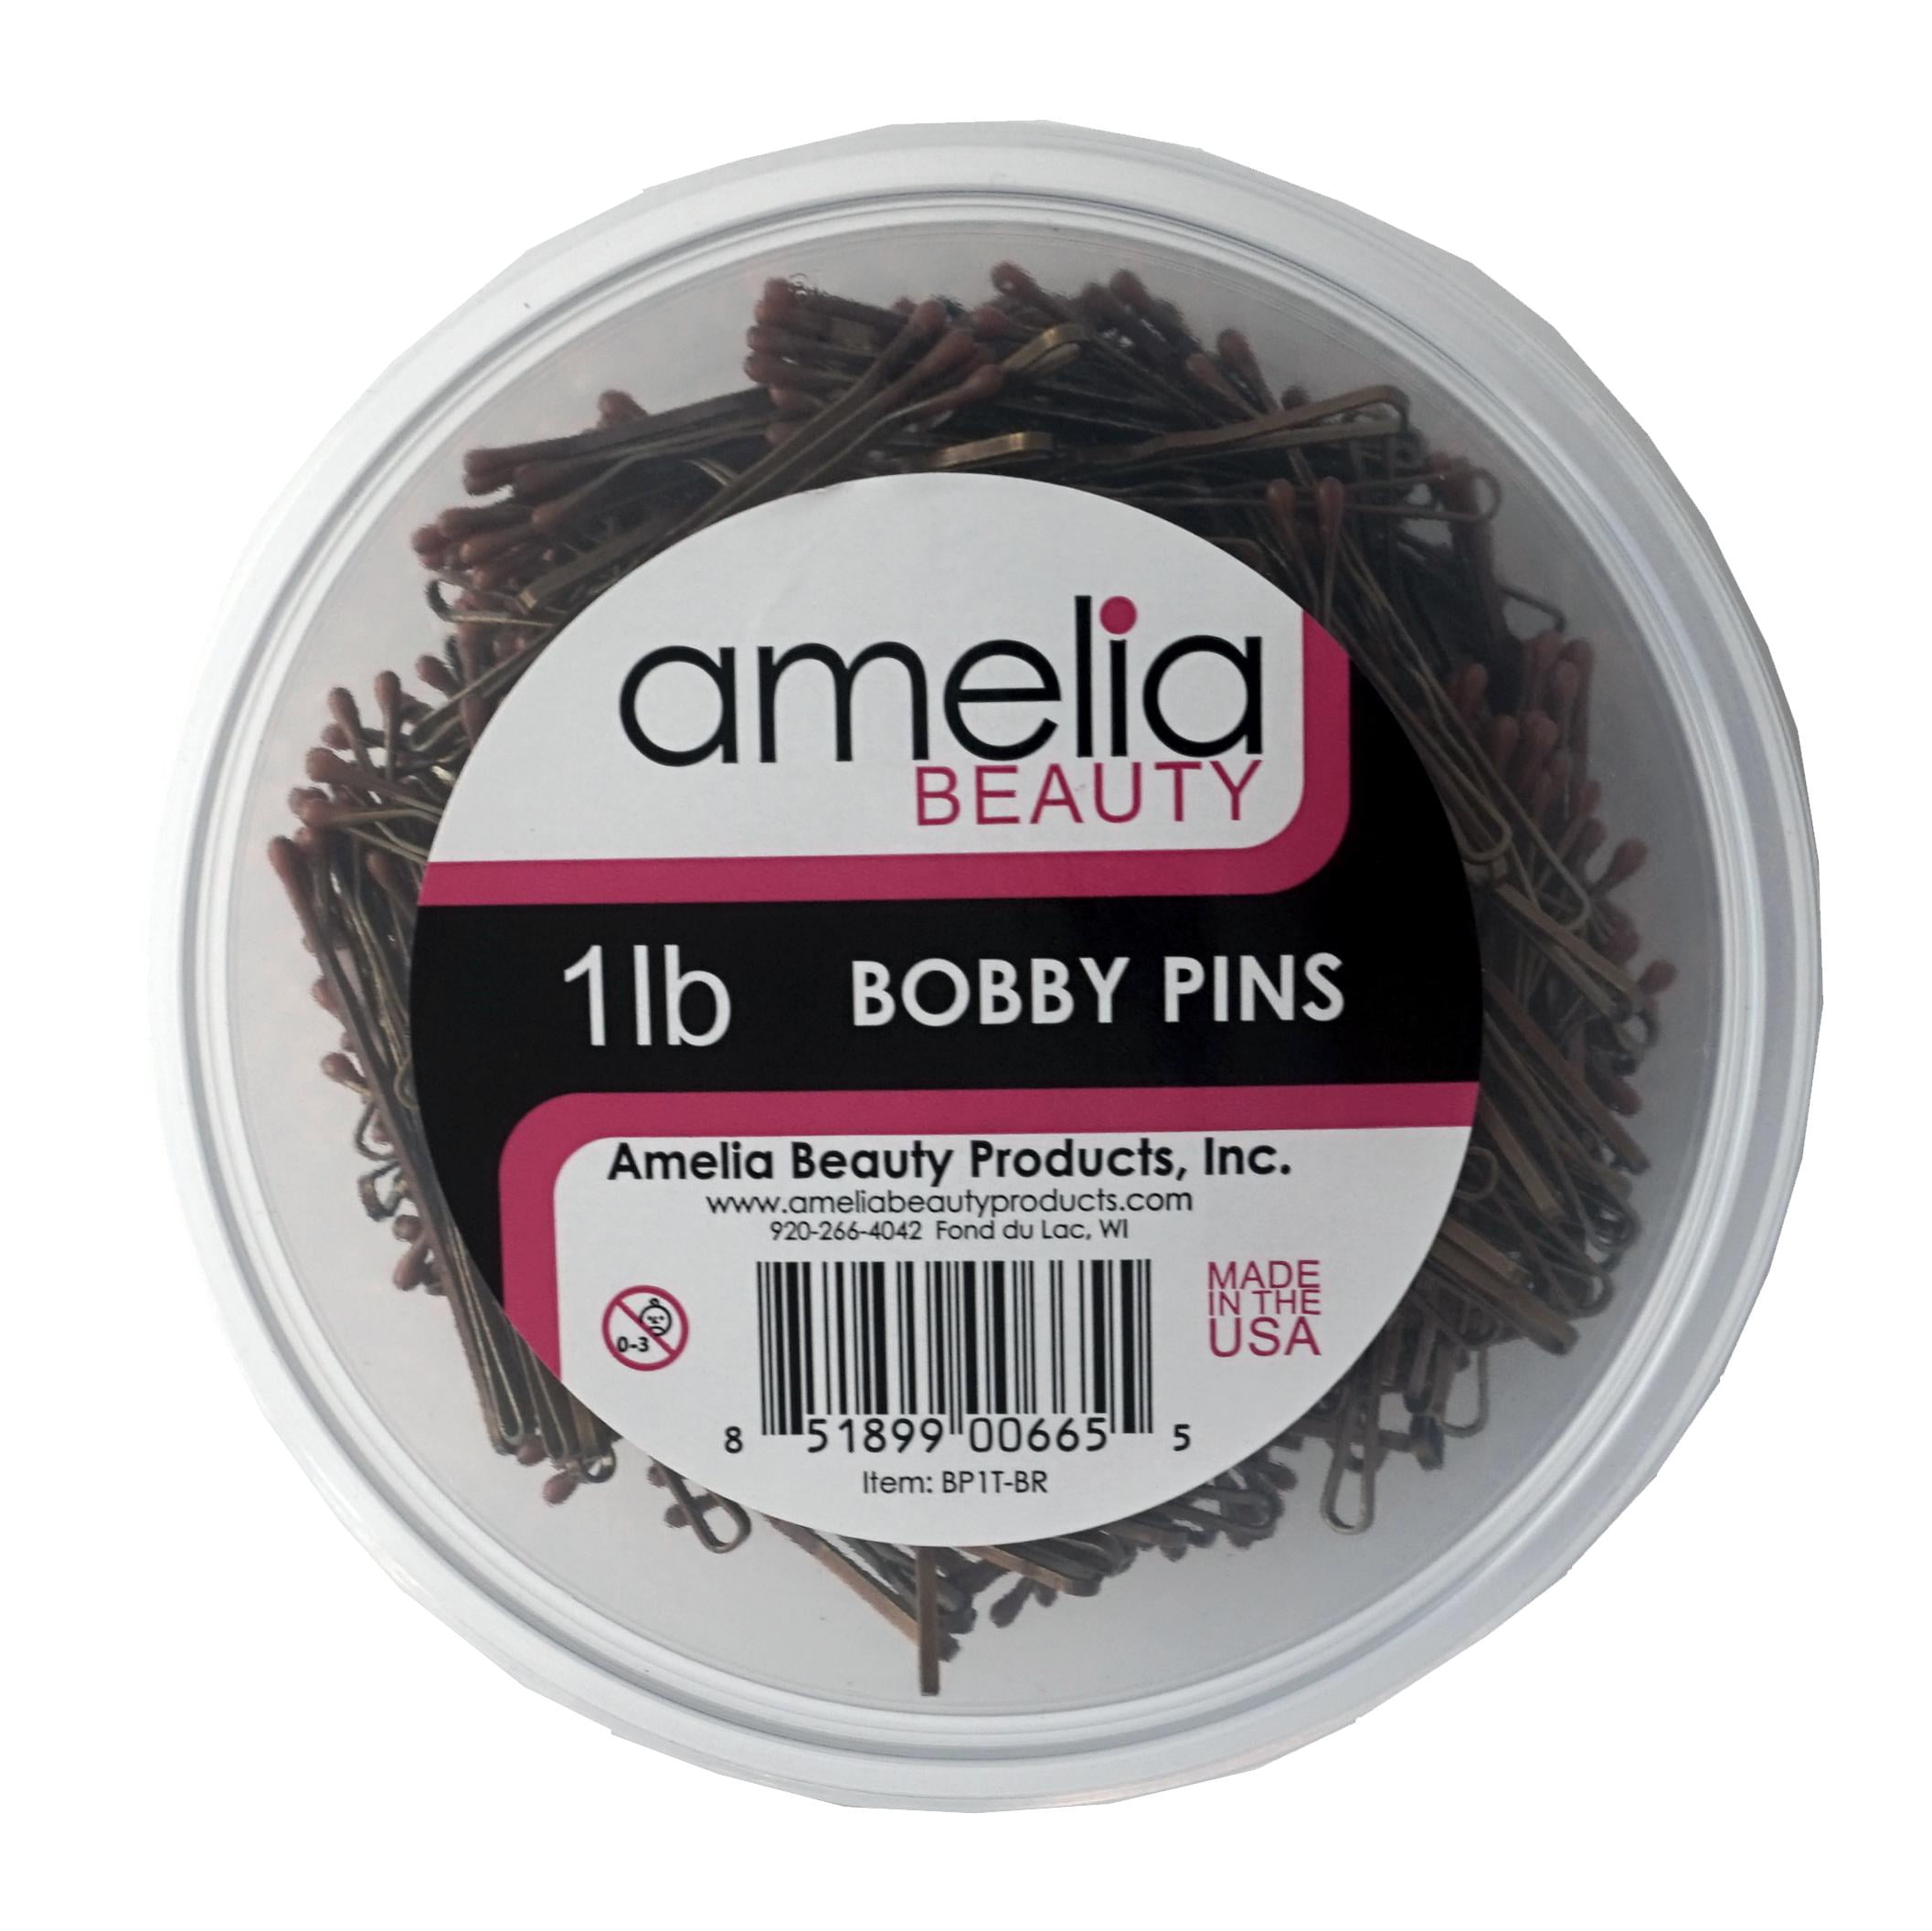 Supreme Bobby Pins - Brown by Marianna for Women - 1 lb Hair Clips